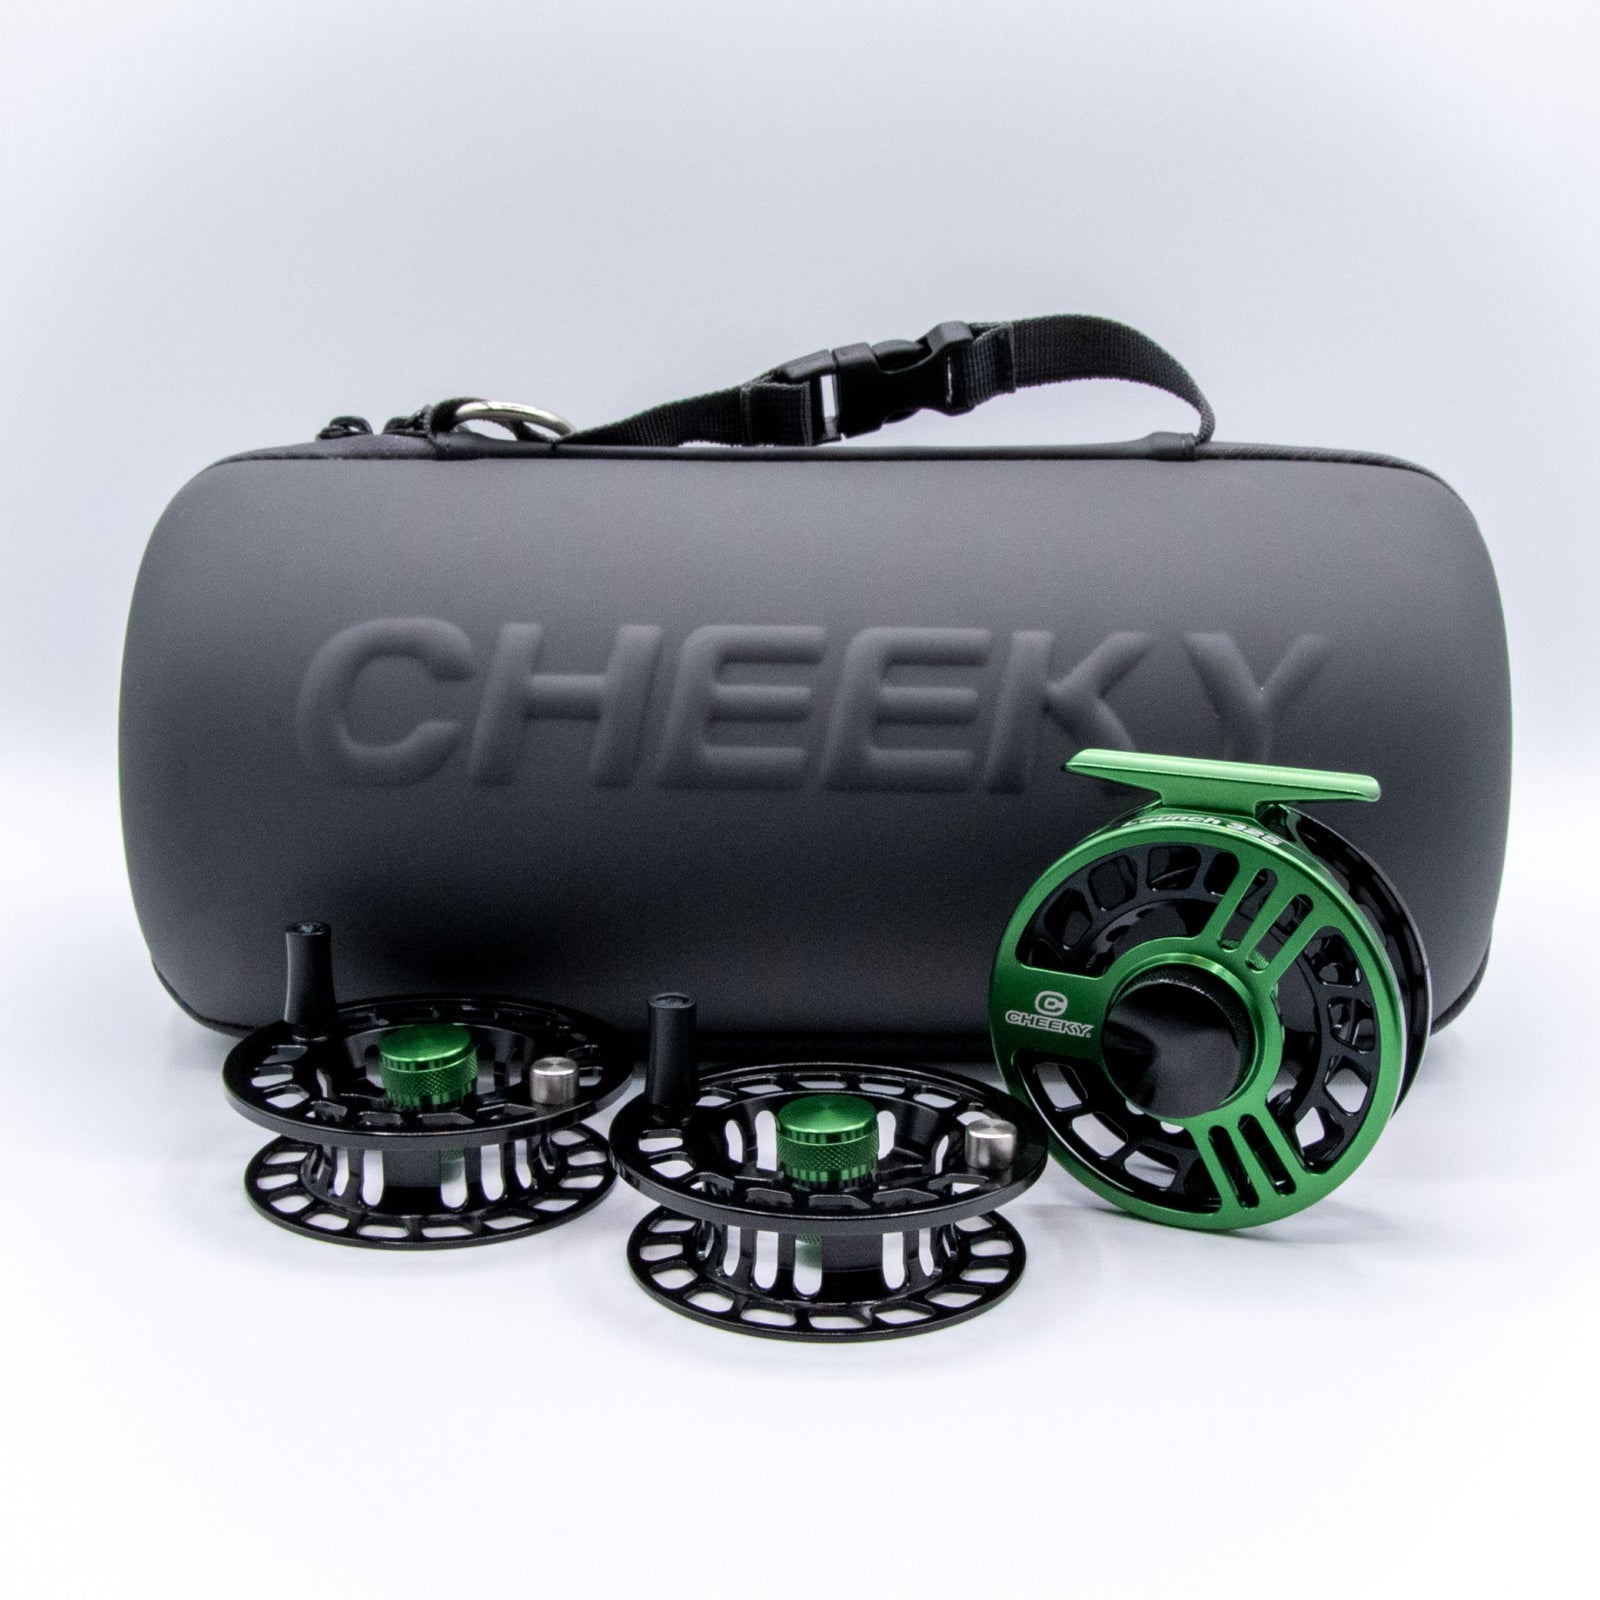 Shop Cheeky Fishing Launch Fly Reel Series Online